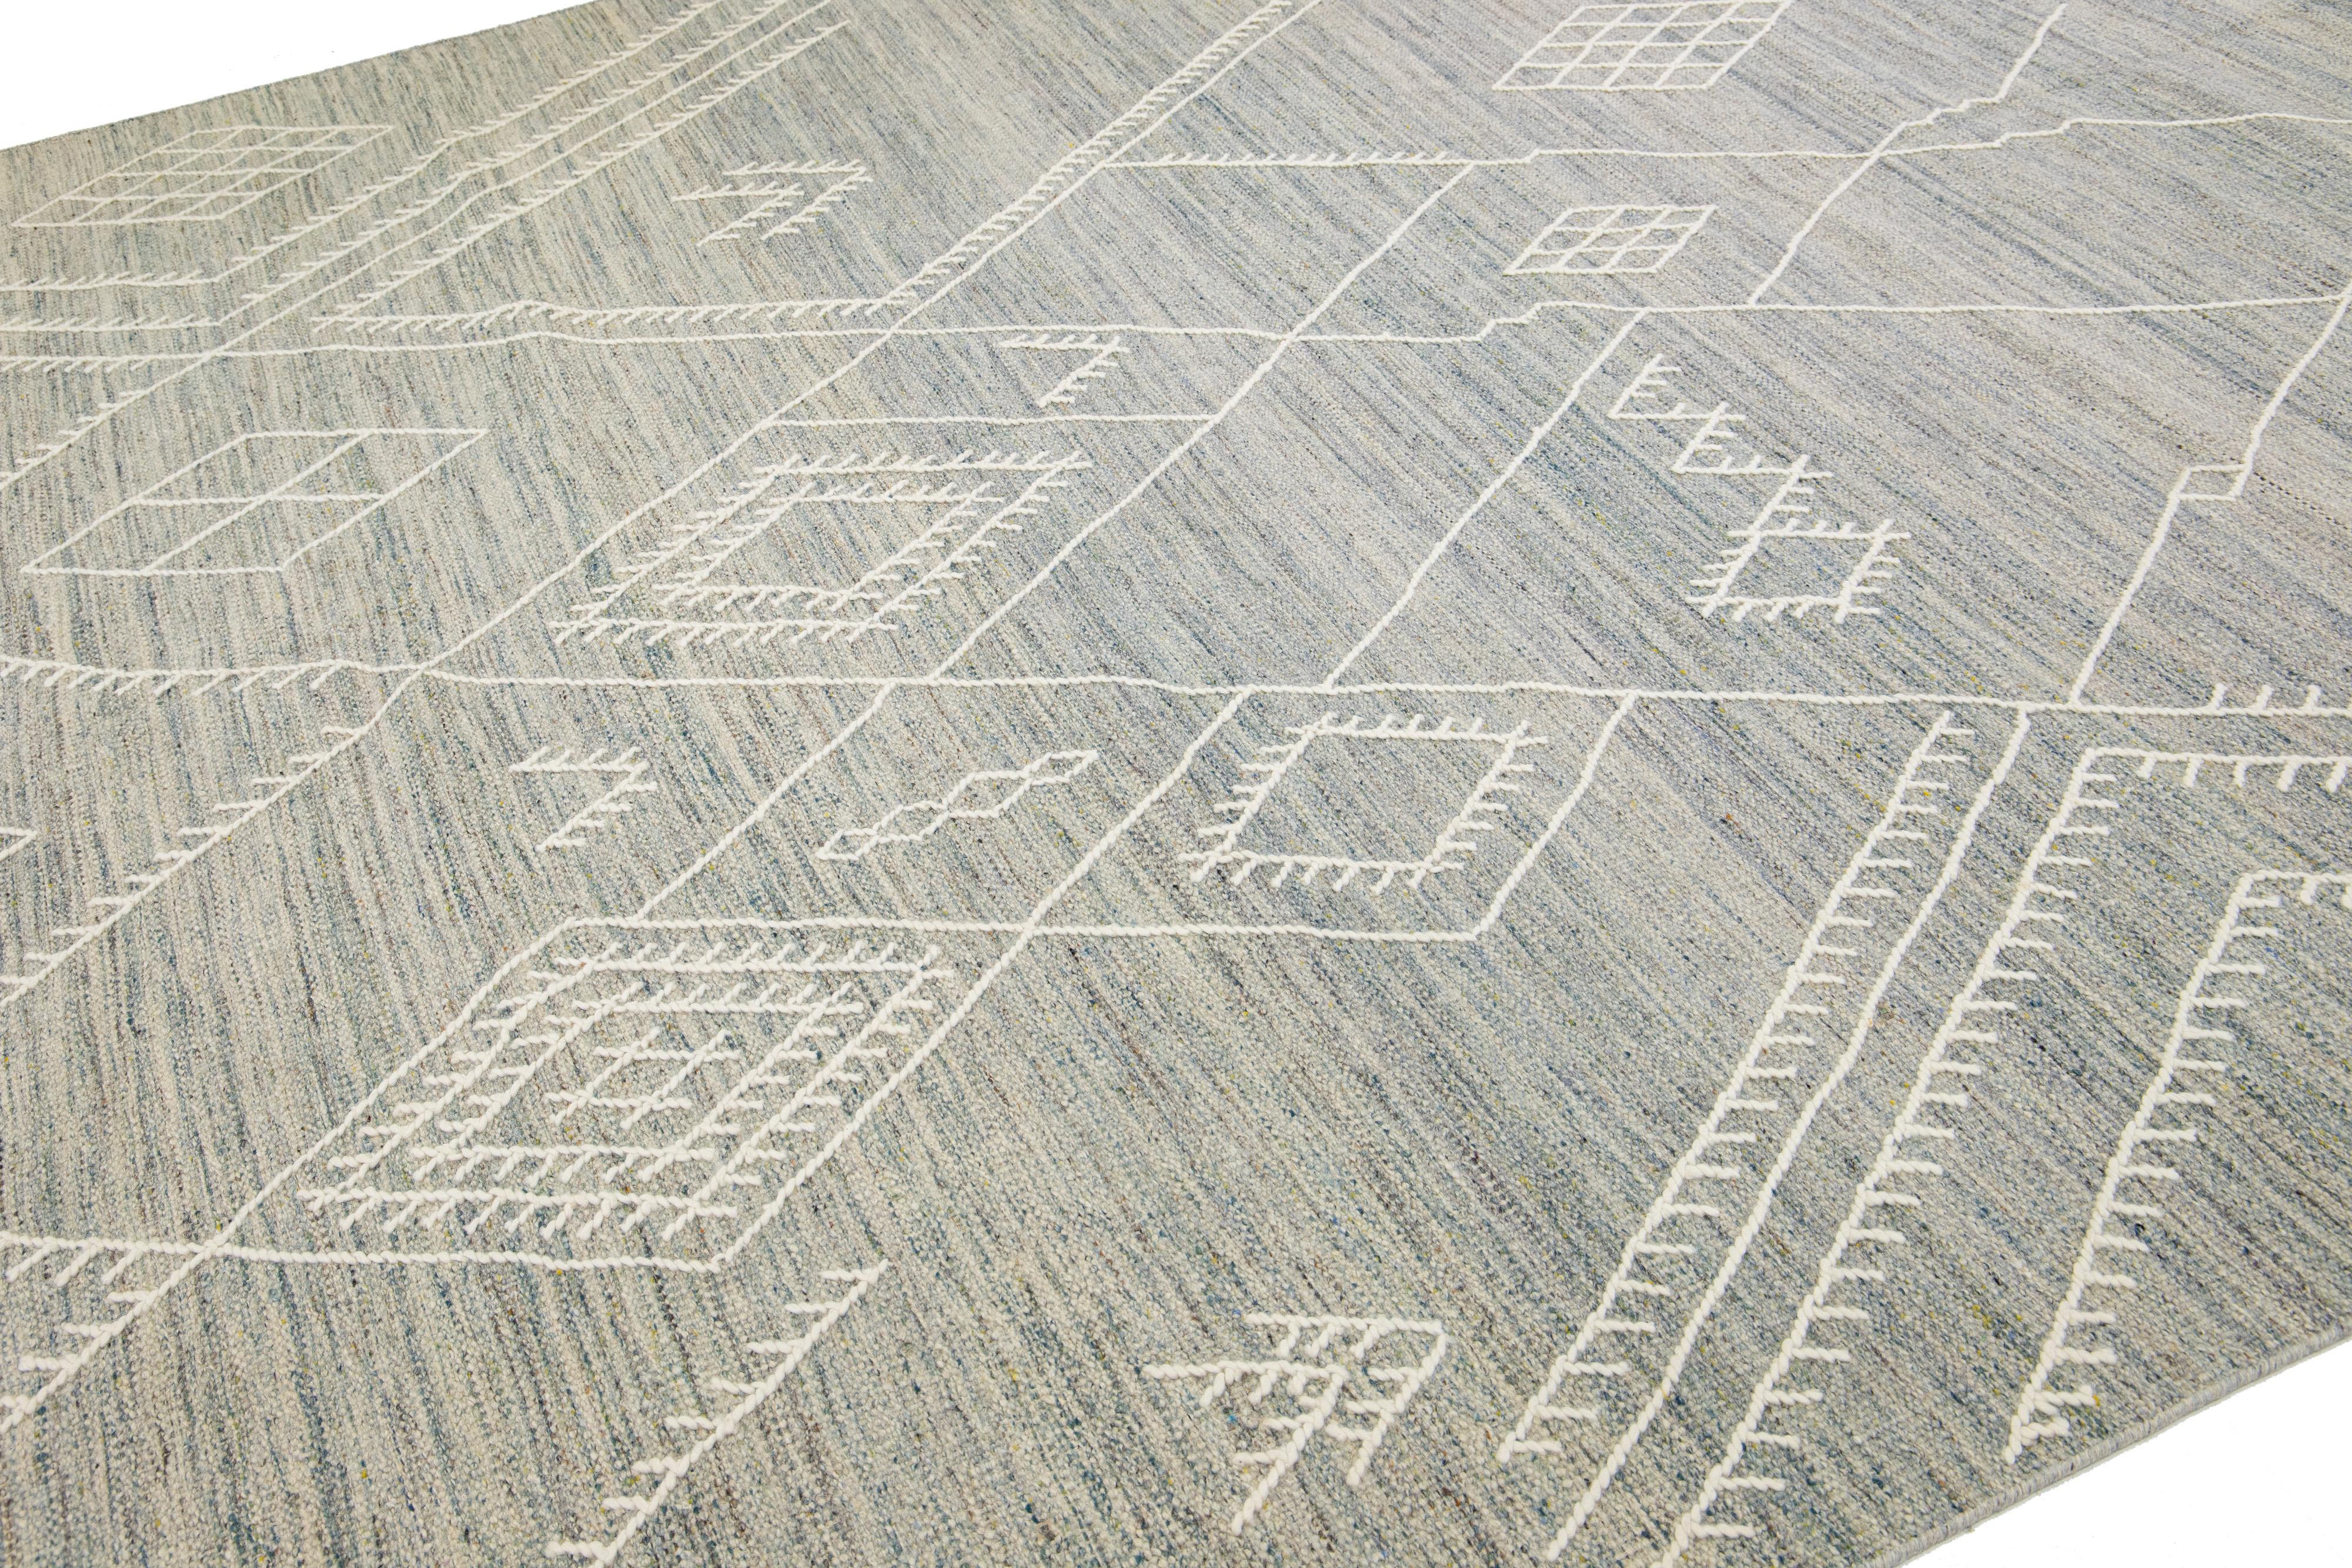 Beautiful kilim handmade wool rug with a gray and blue field. This custom modern flatweave rug of our Nantucket collection has ivory accents and a gorgeous all-over geometric coastal design.

This rug measures 10'2